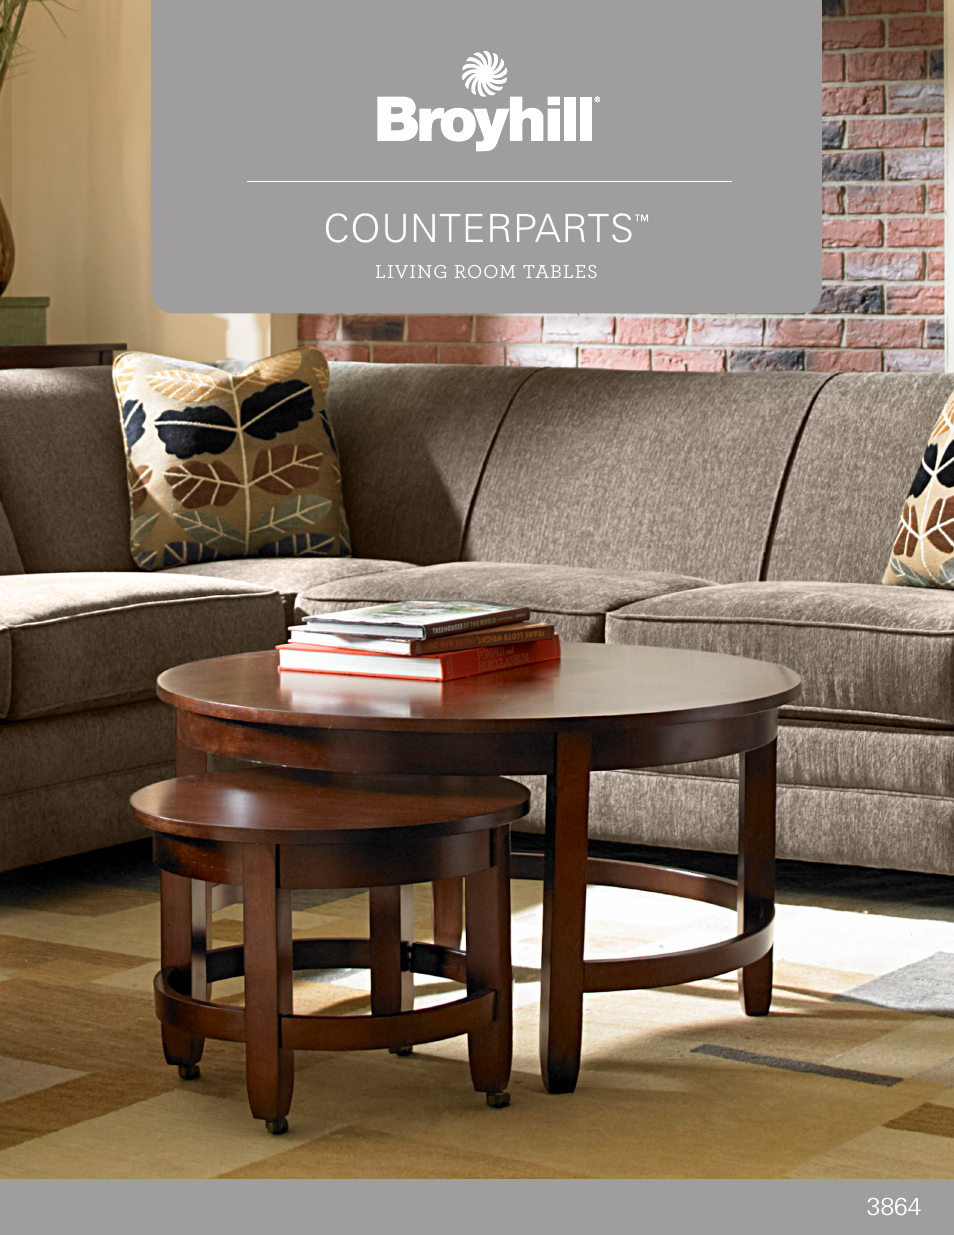 COUNTERPARTS END TABLE Product Details